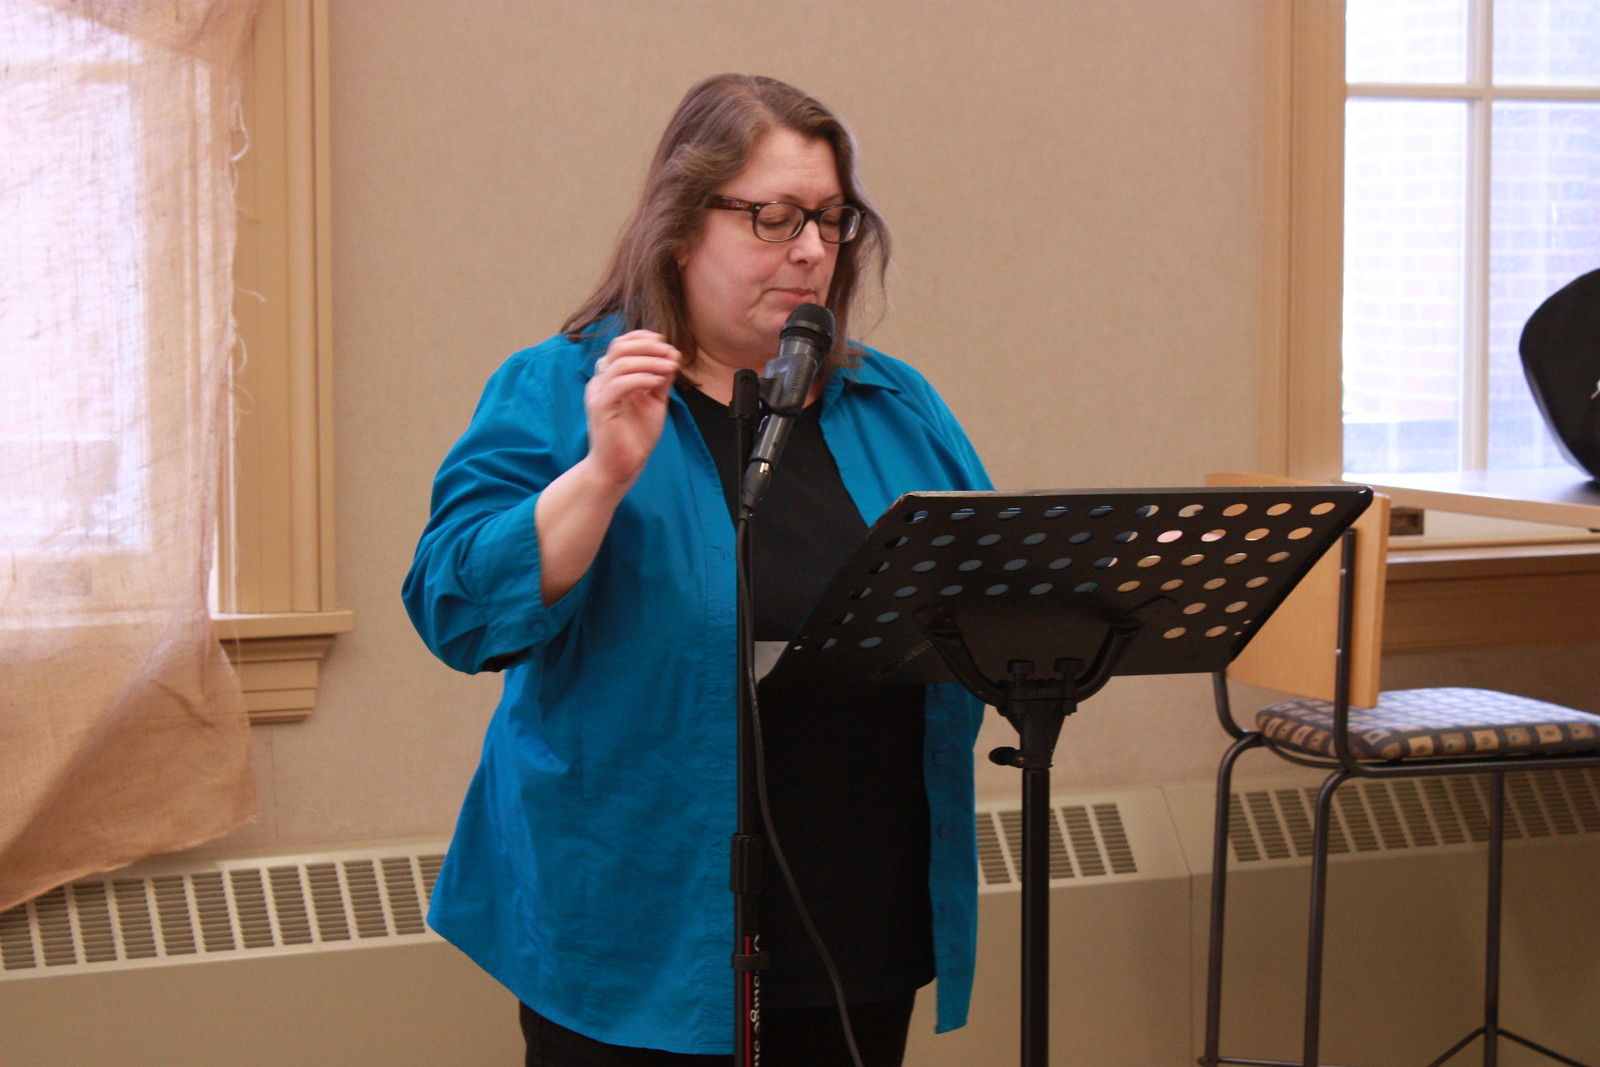 Cheryl A. Rice at the 2019 Word Fest Readings Against the End of the World, April 13, at UAlbany, Albany, NY